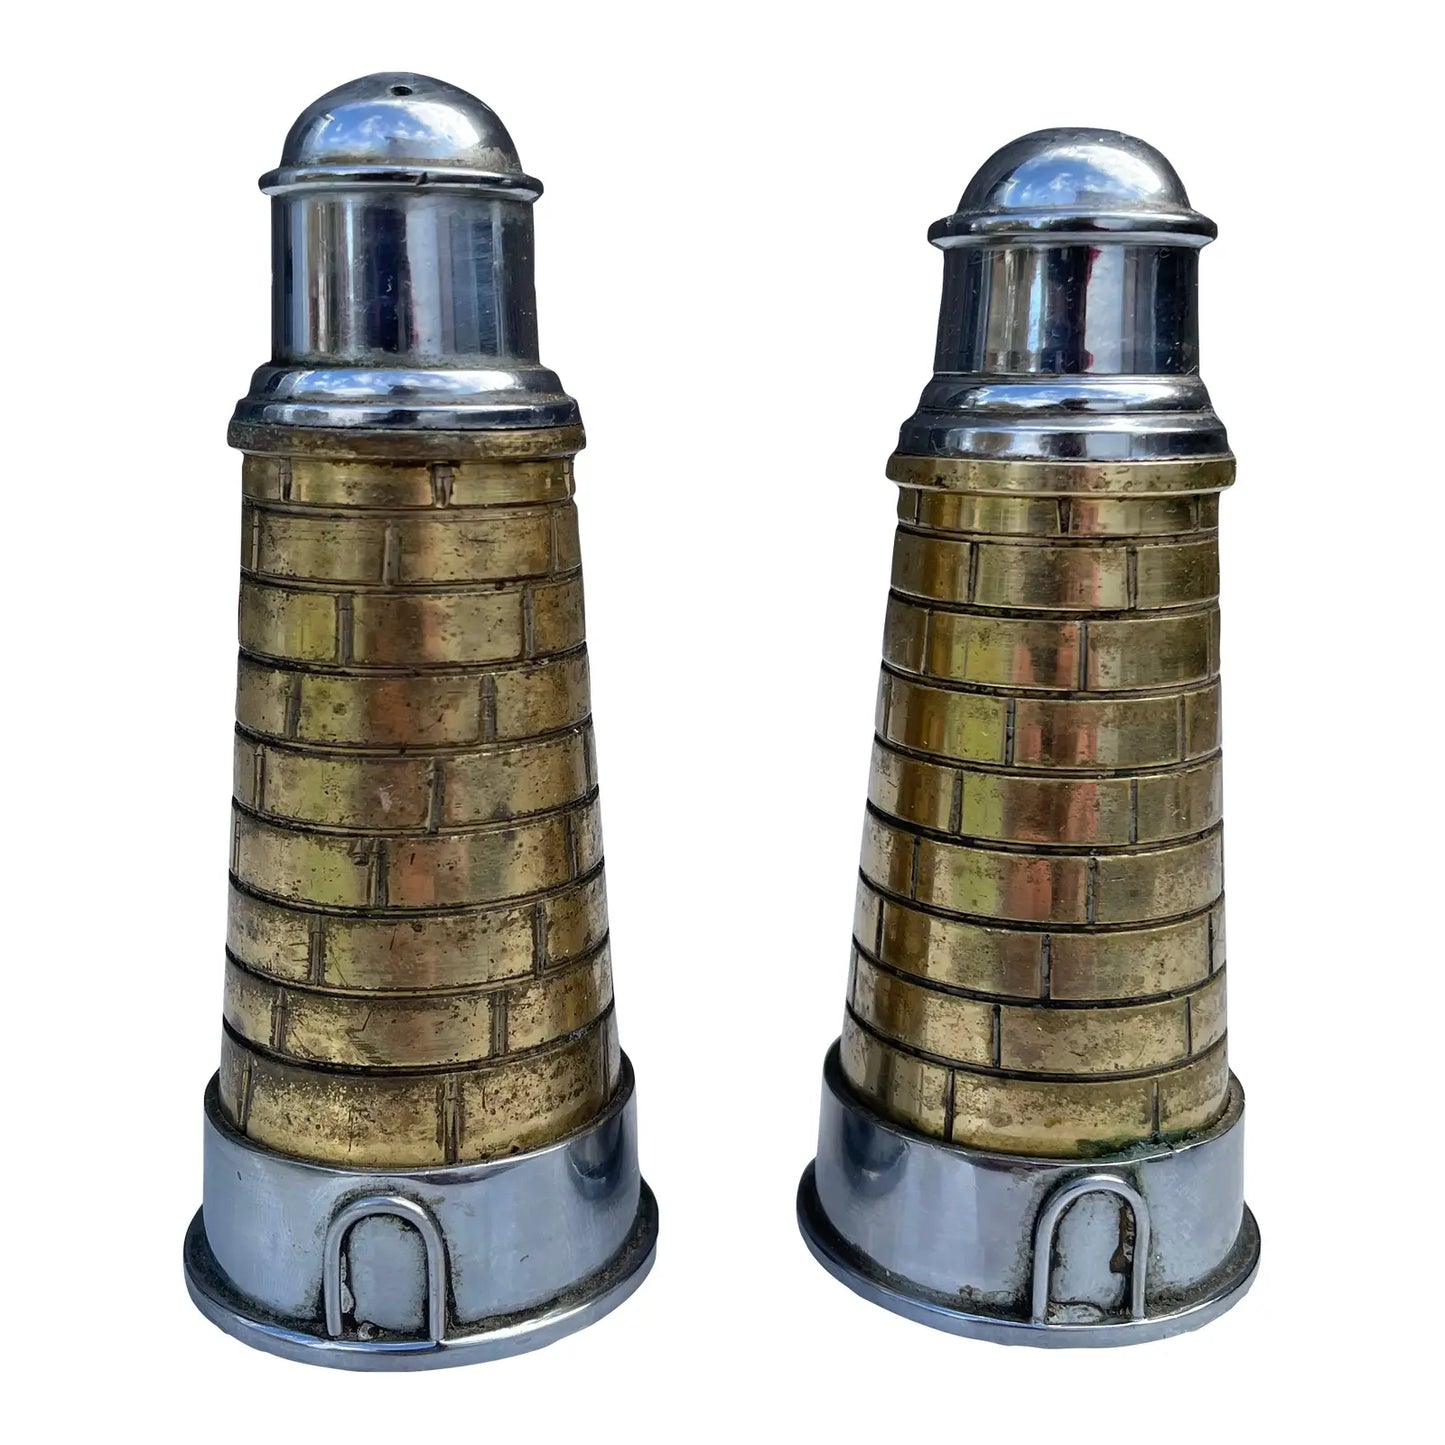 Lighthouse Salt and Pepper Shakers - Brass & Stainless